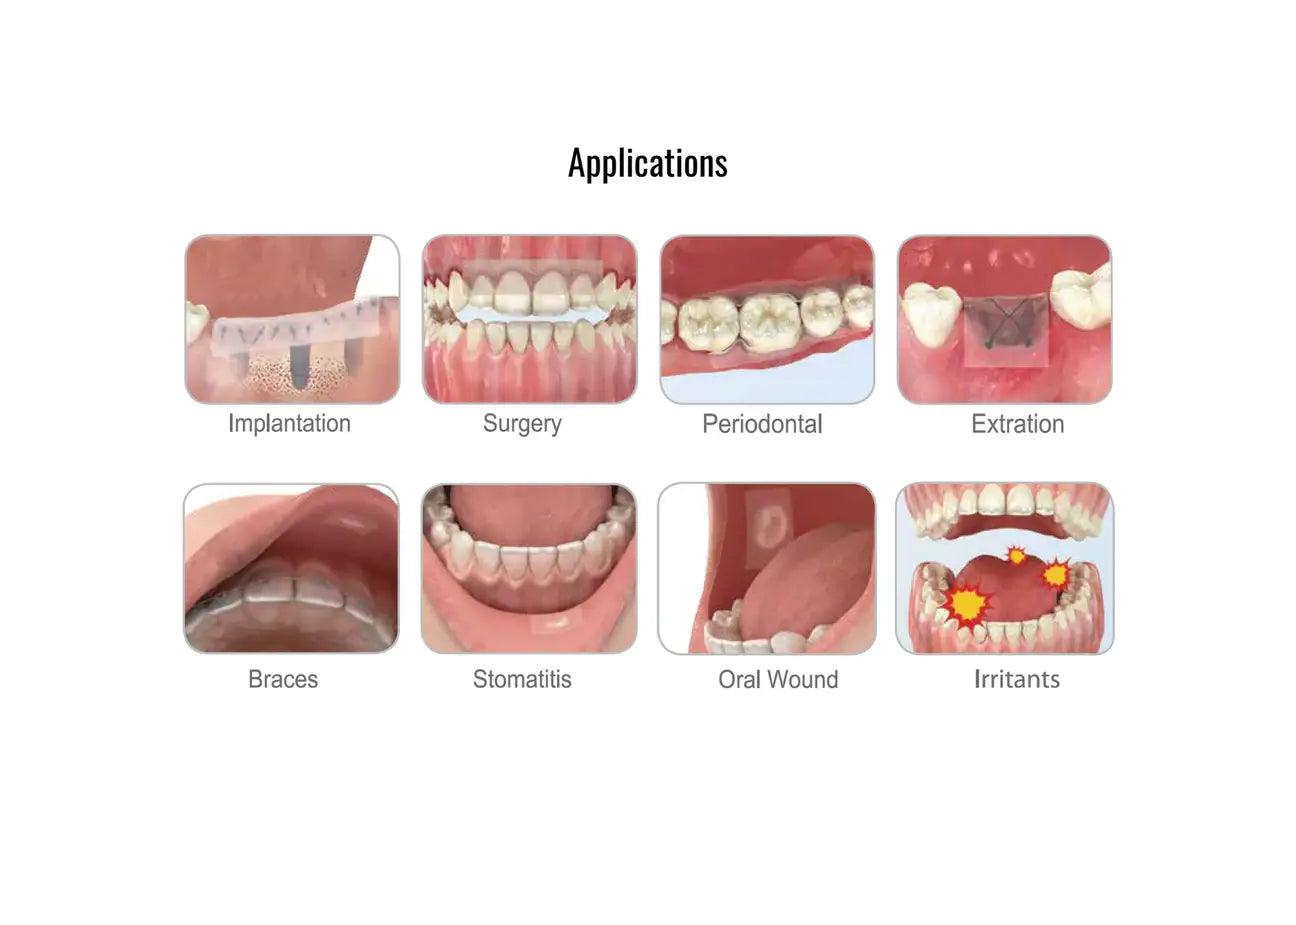 8 different types of applications. From left-to-right, top-to-bottom - implantation, surgery, periodontal, extraction, braces, stomatitis, oral wound, and irritants.